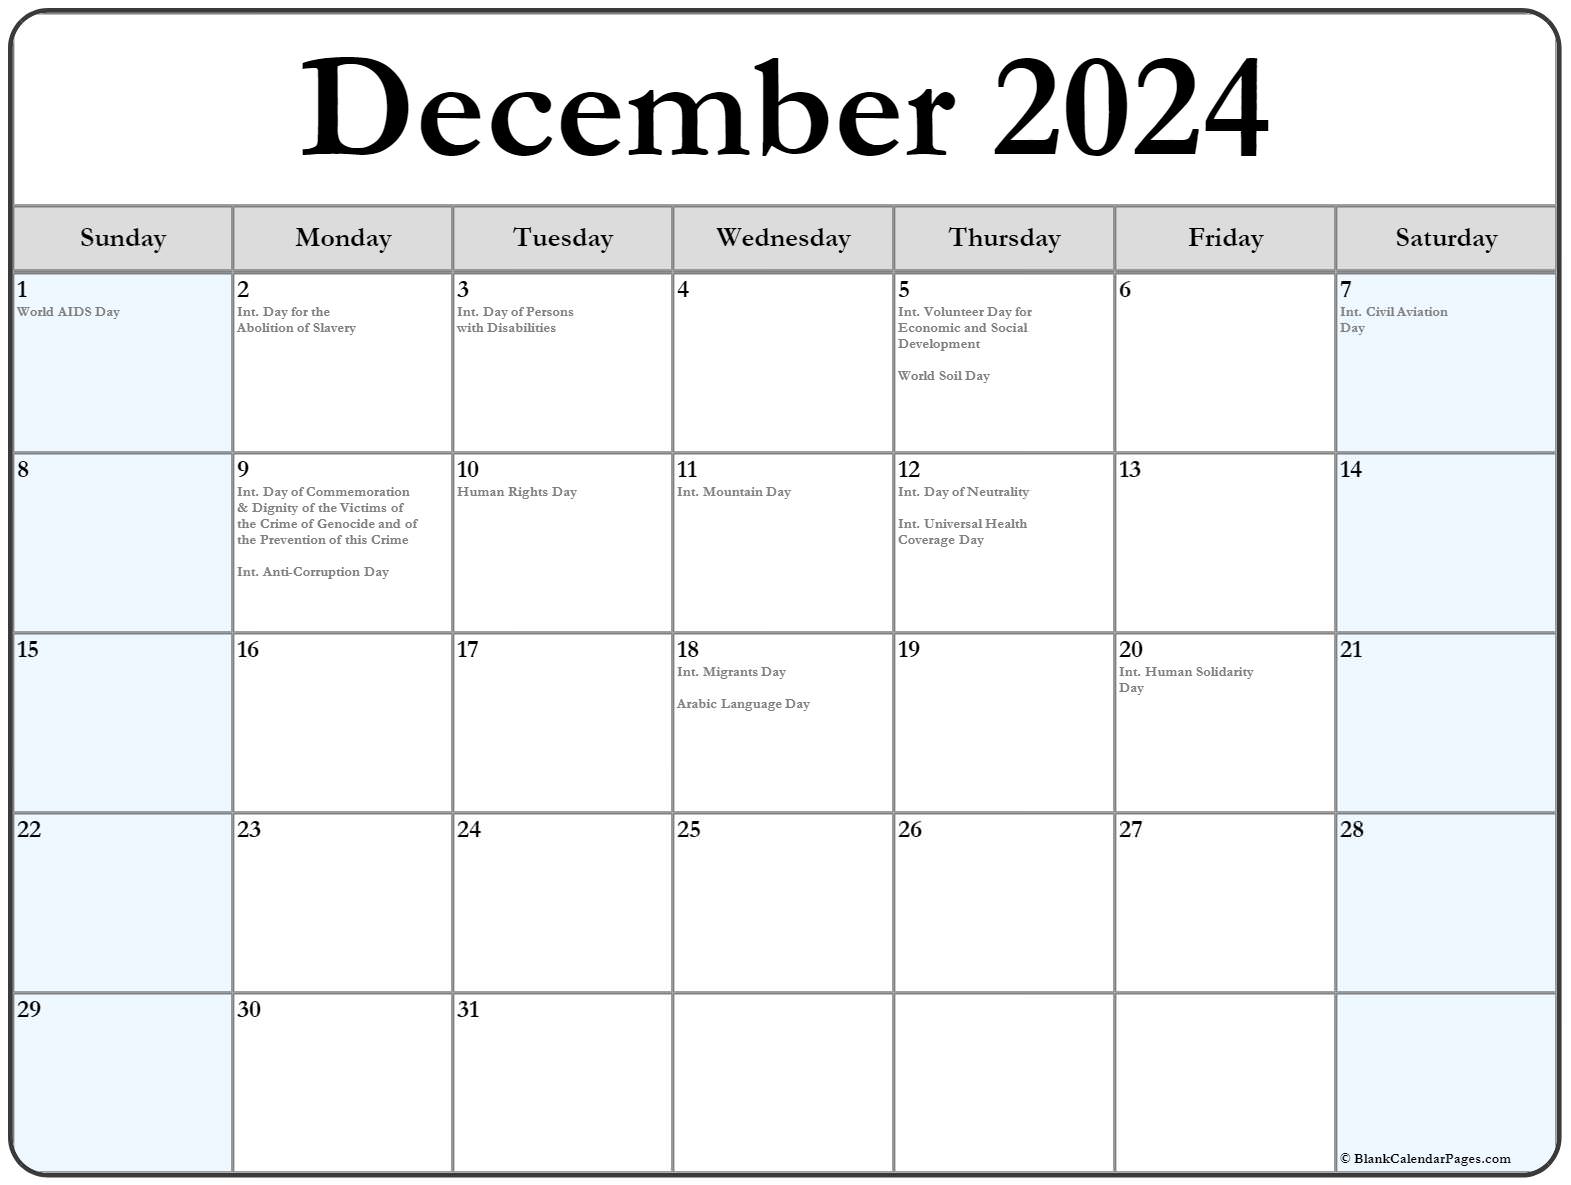 december-2020-calendar-printable-how-to-draw-findpea